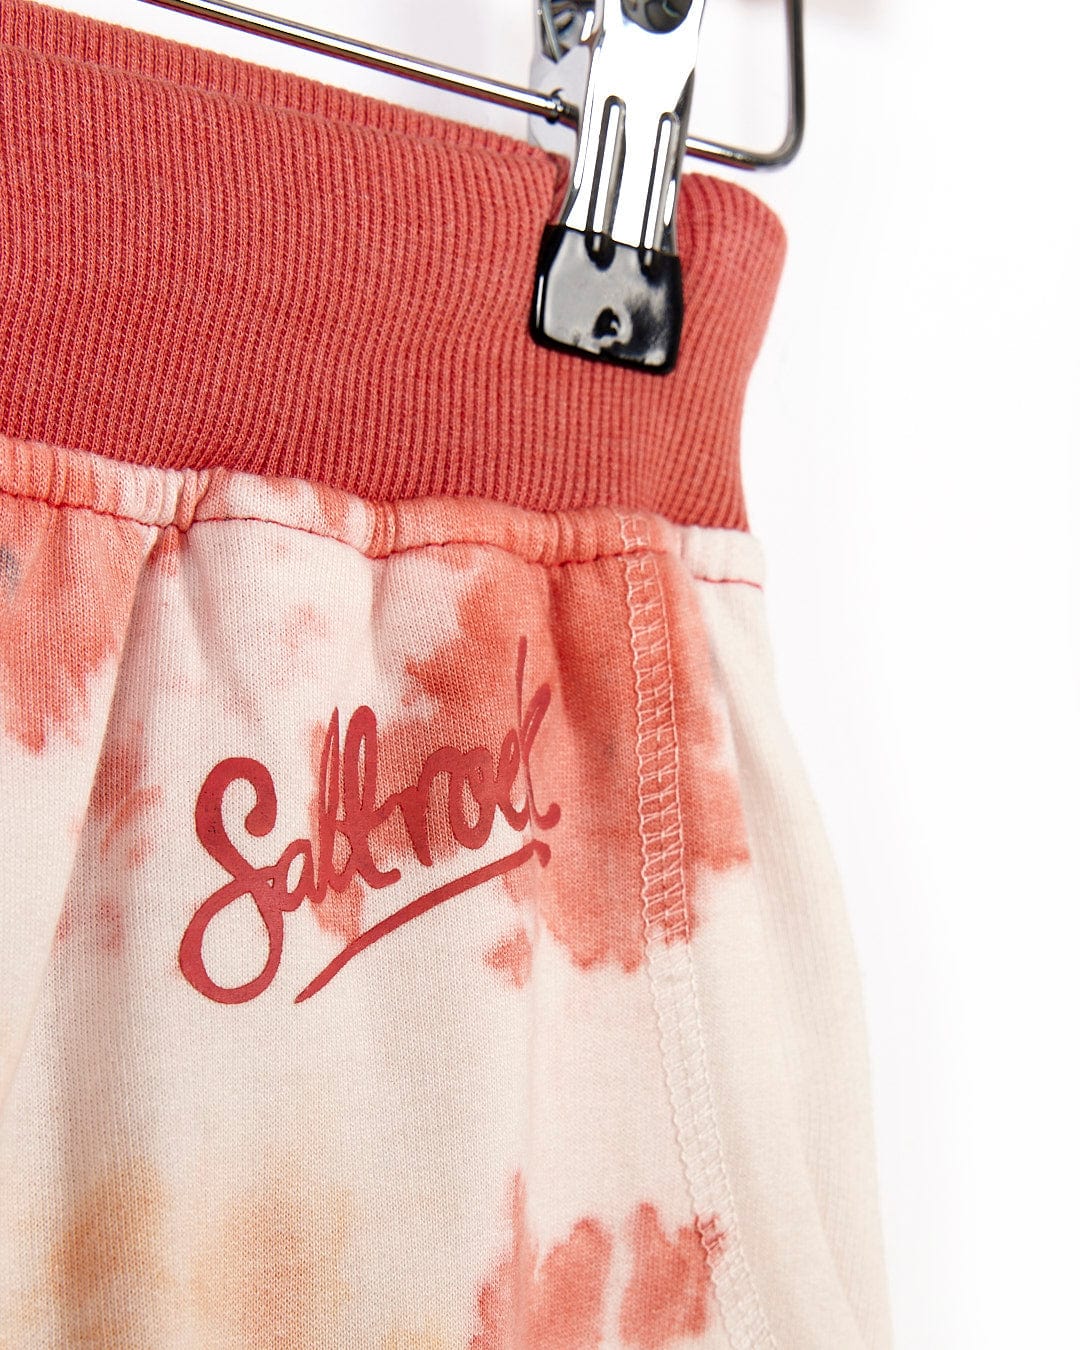 A pair of Hippy - Kids Tie Dye Jogger - Multi shorts with the Saltrock brand name on them.